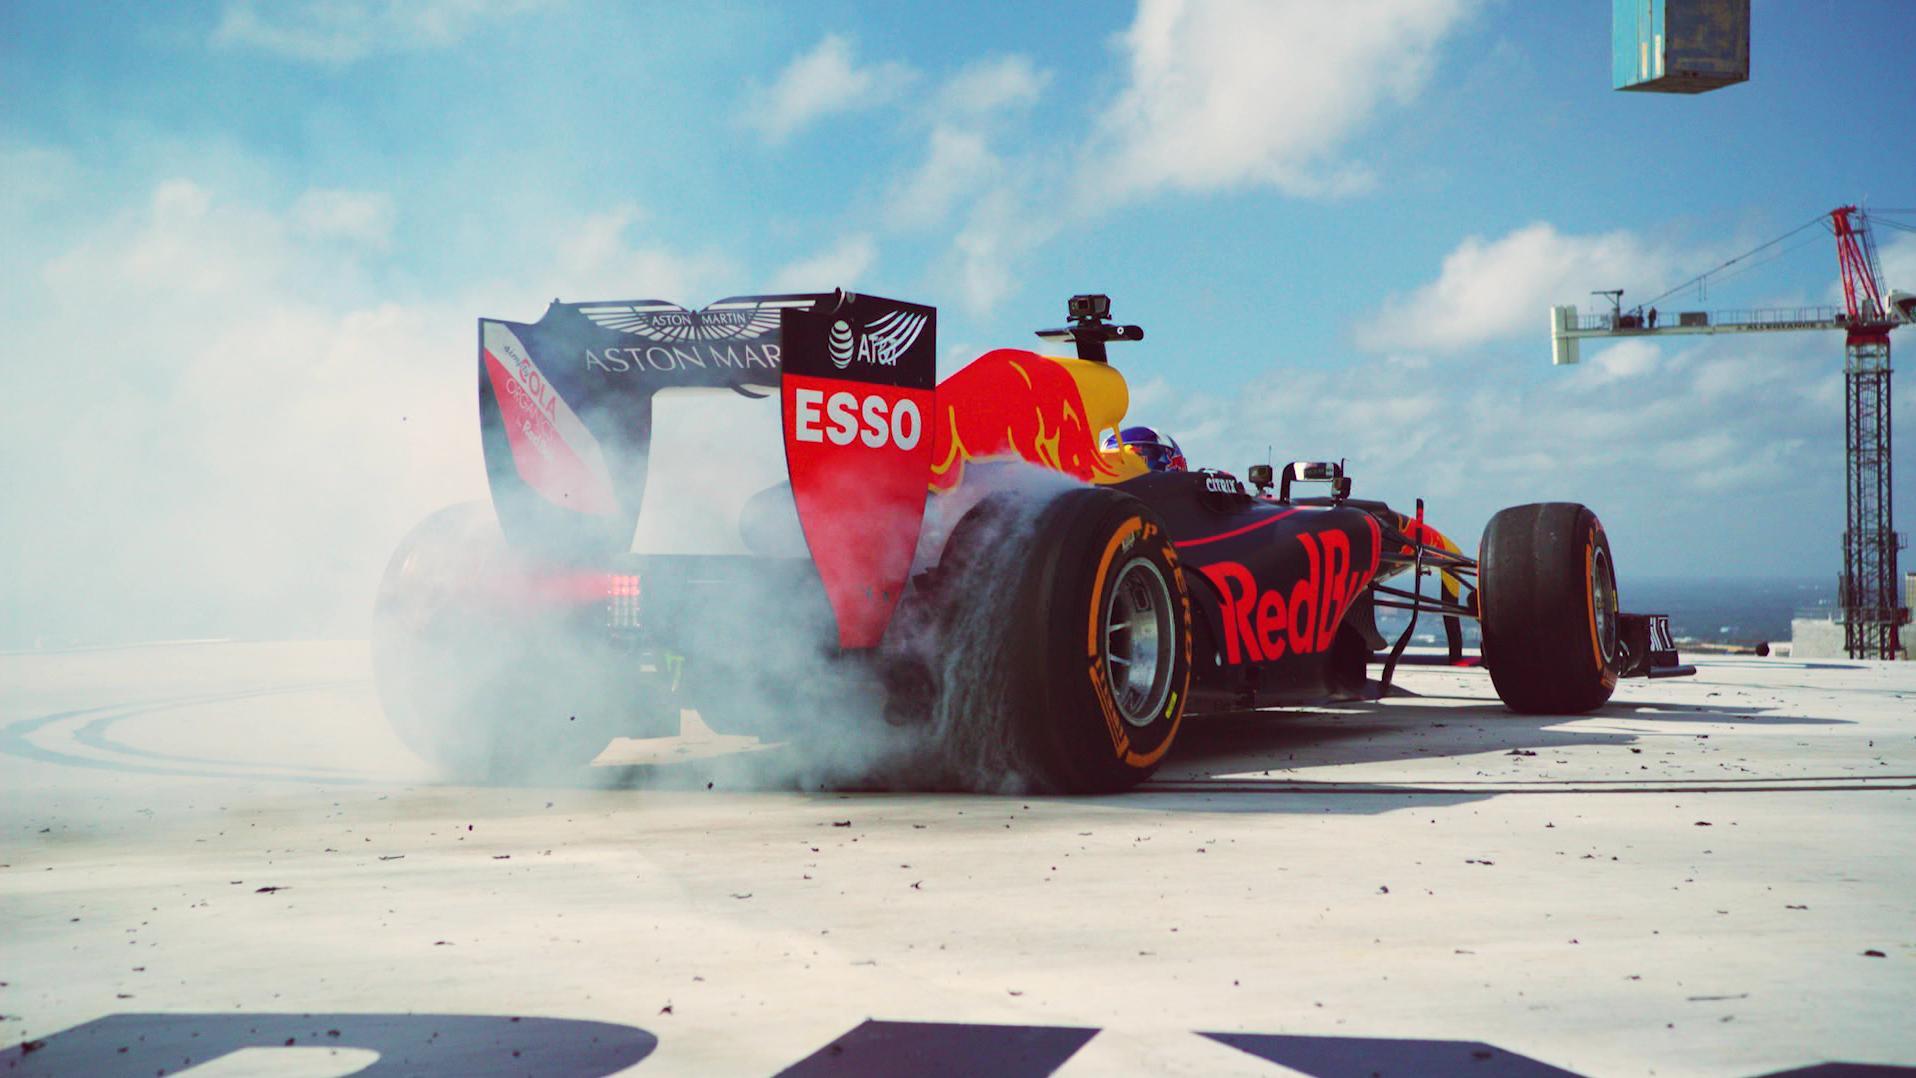 Red Bull F1 team reaches new heights with skyscraper burnout - Stream the Video